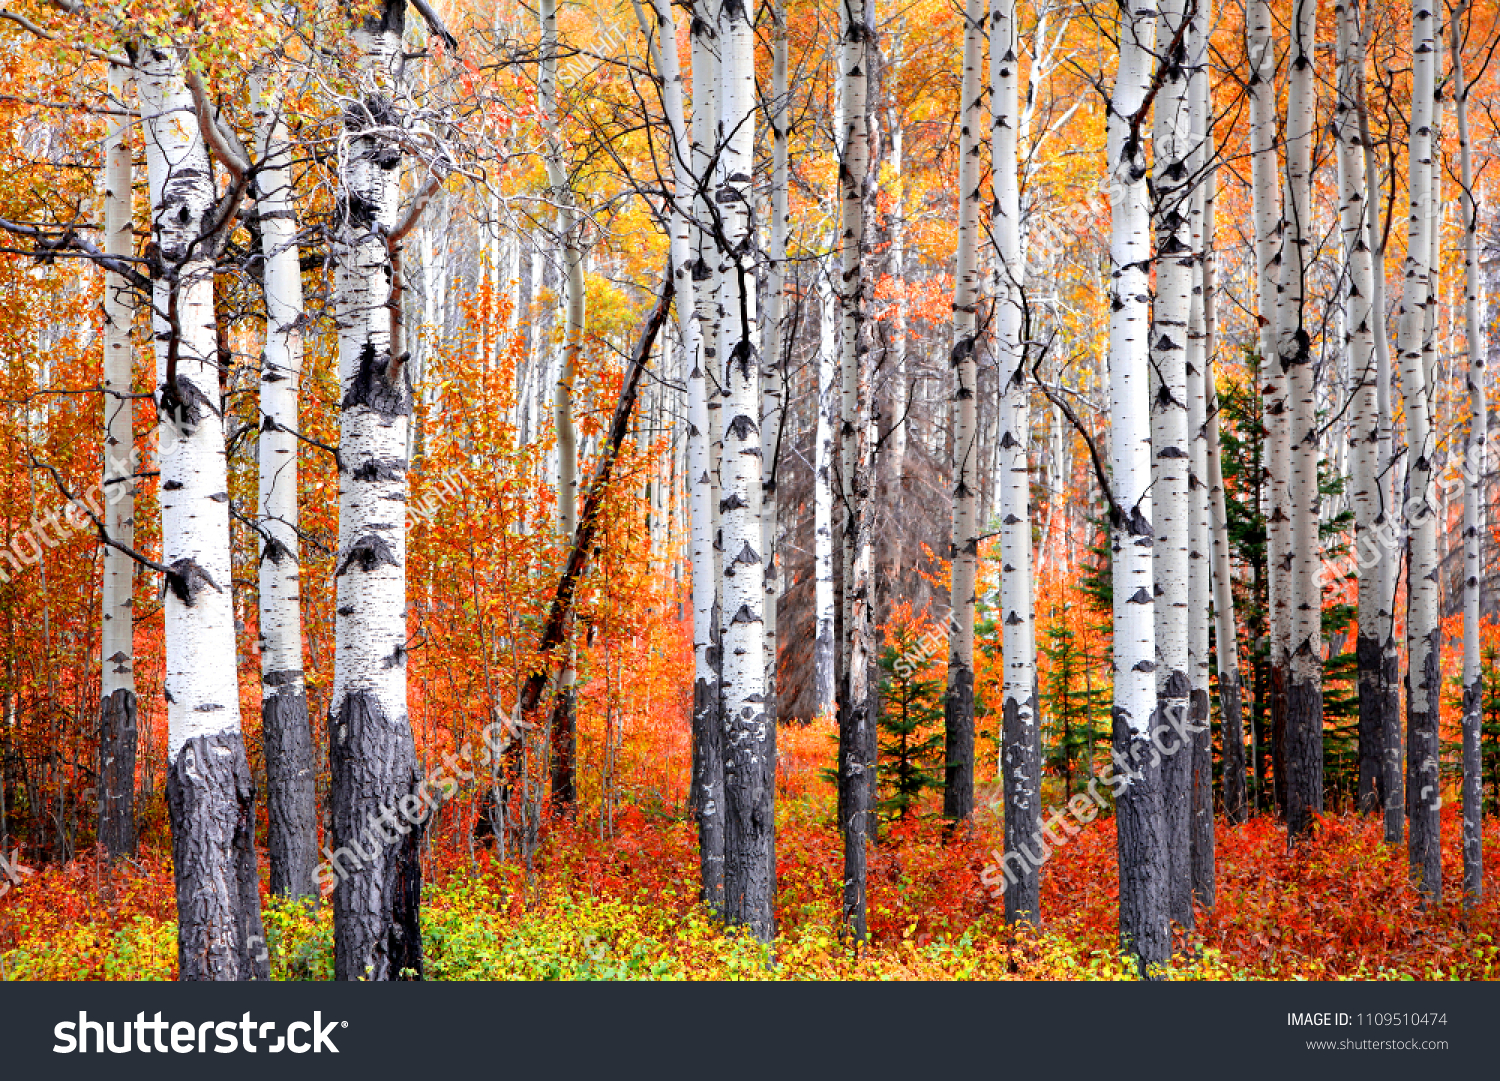 Aspen trees in Banff national park in autumn time #1109510474